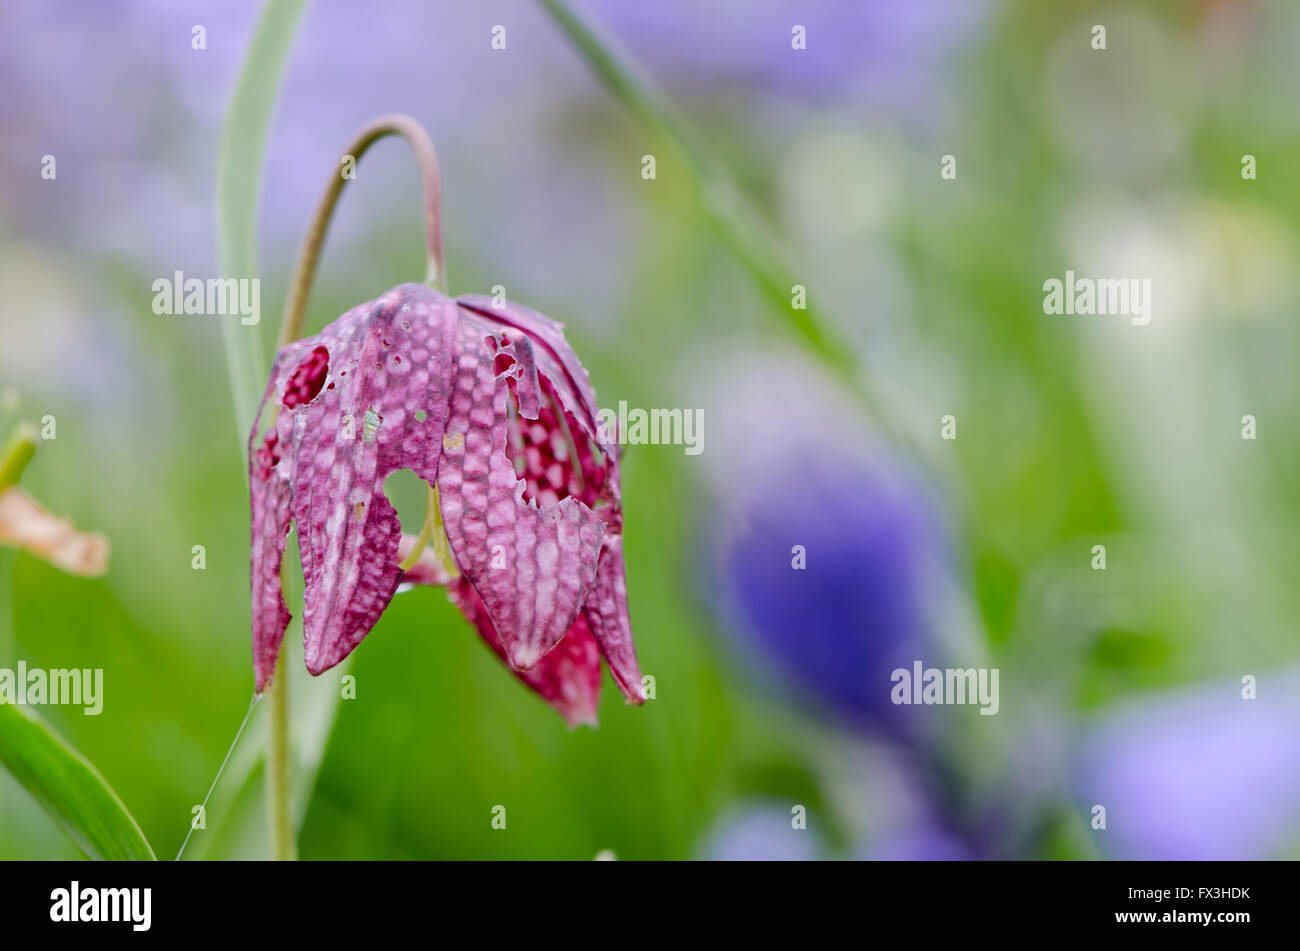 Snake's head fritillary (Fritillaria meleagris). A spring flower in the family Liliaceae, with holes in petals caused by slugs Stock Photo